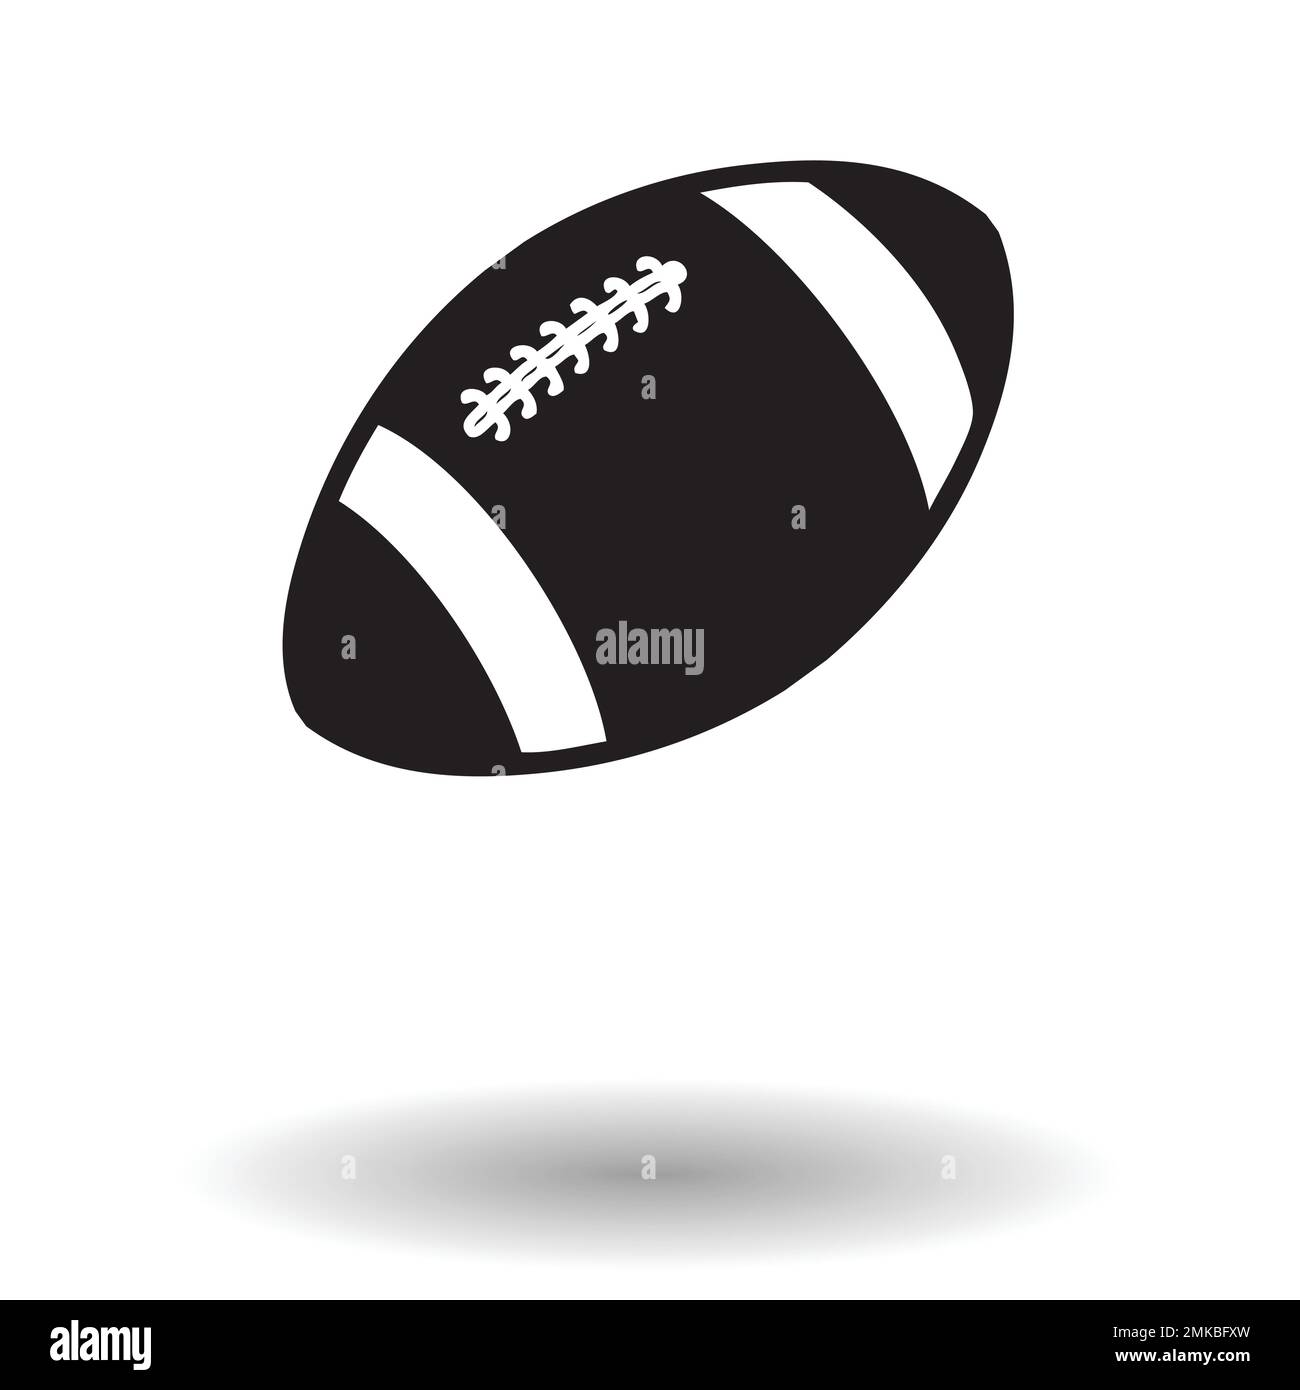 American footbal, rugby ball icon with shadow over white background vector illustration. Sportclub logo concept Stock Vector